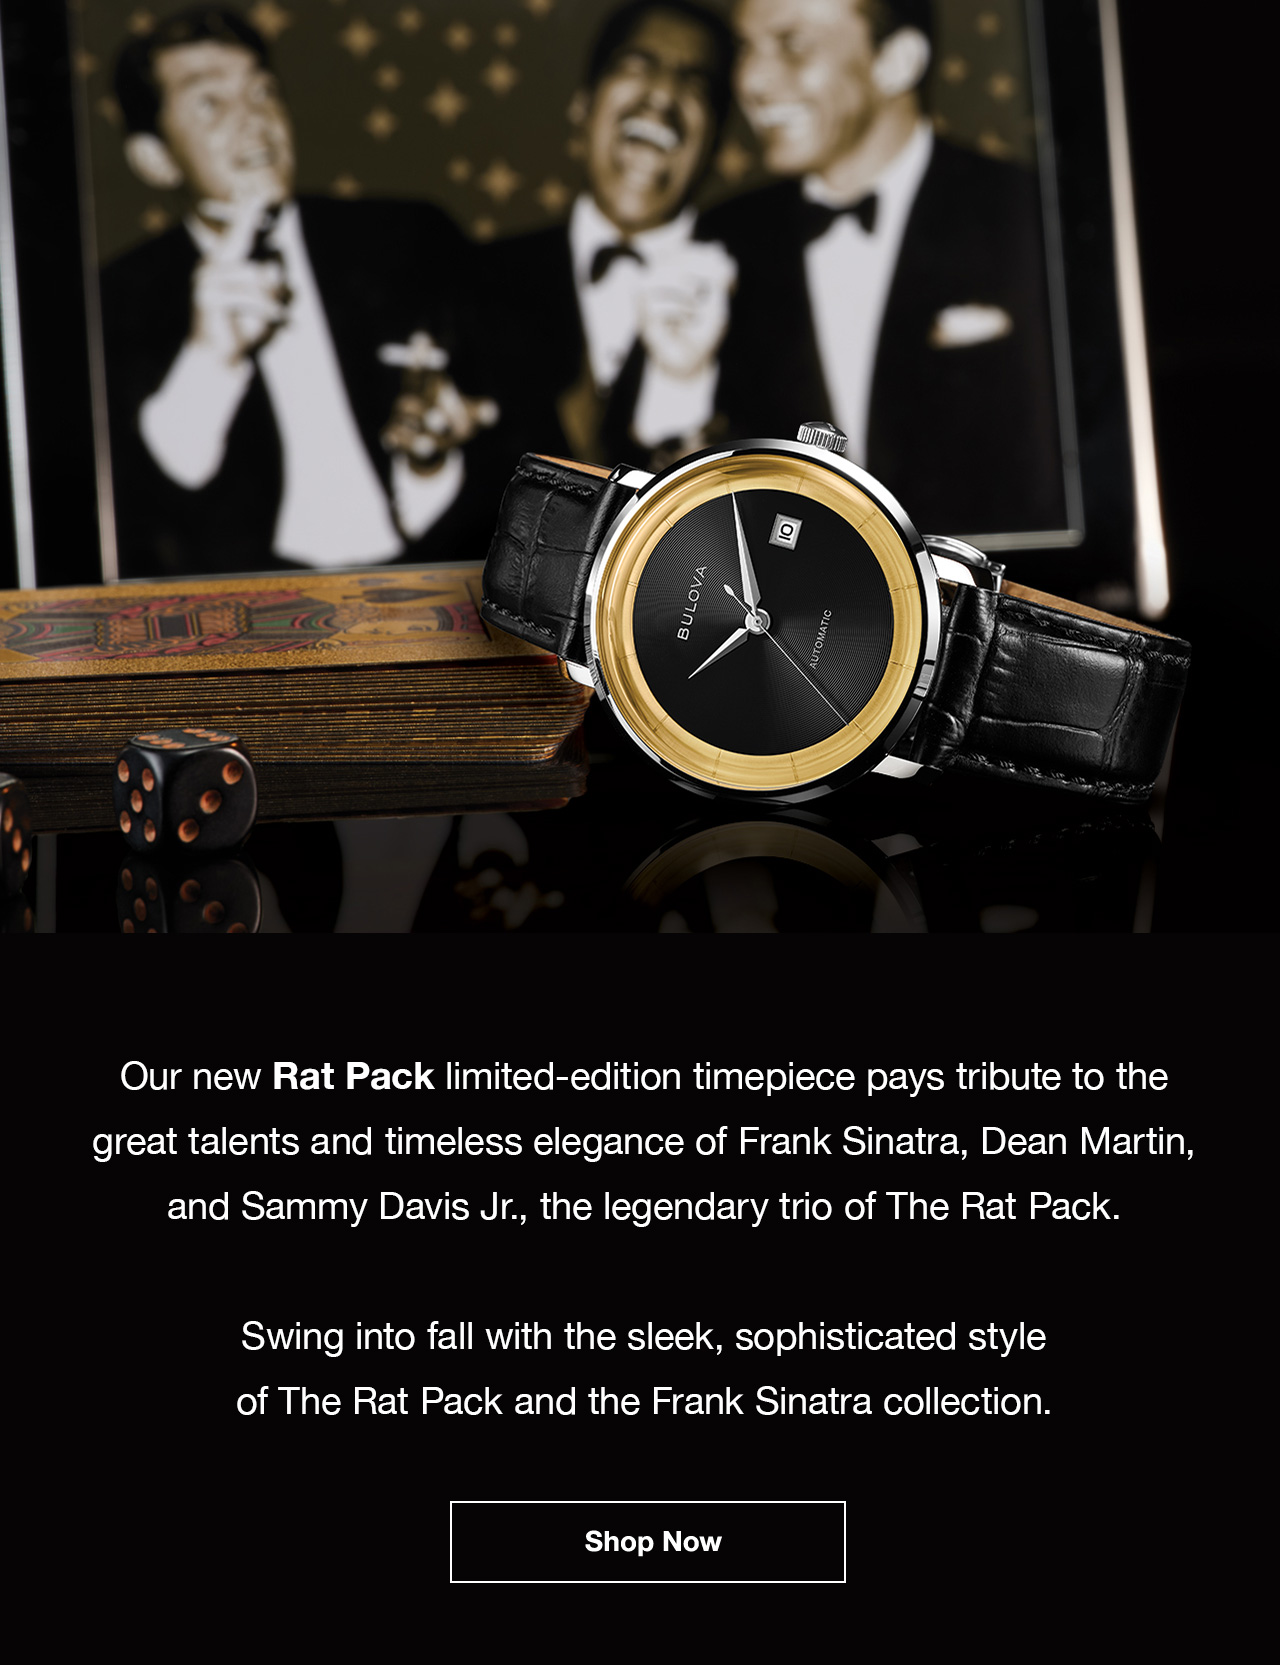 Our new Rat Pack limited-edition timepiece pays tribute to the great talents and timeless elegance of Frank Sinatra, Dean Martin, and Sammy Davis Jr., the legendary trio of The Rat Pack.   Swing into fall with the sleek, sophisticated style of The Rat Pack and the Frank Sinatra collection.